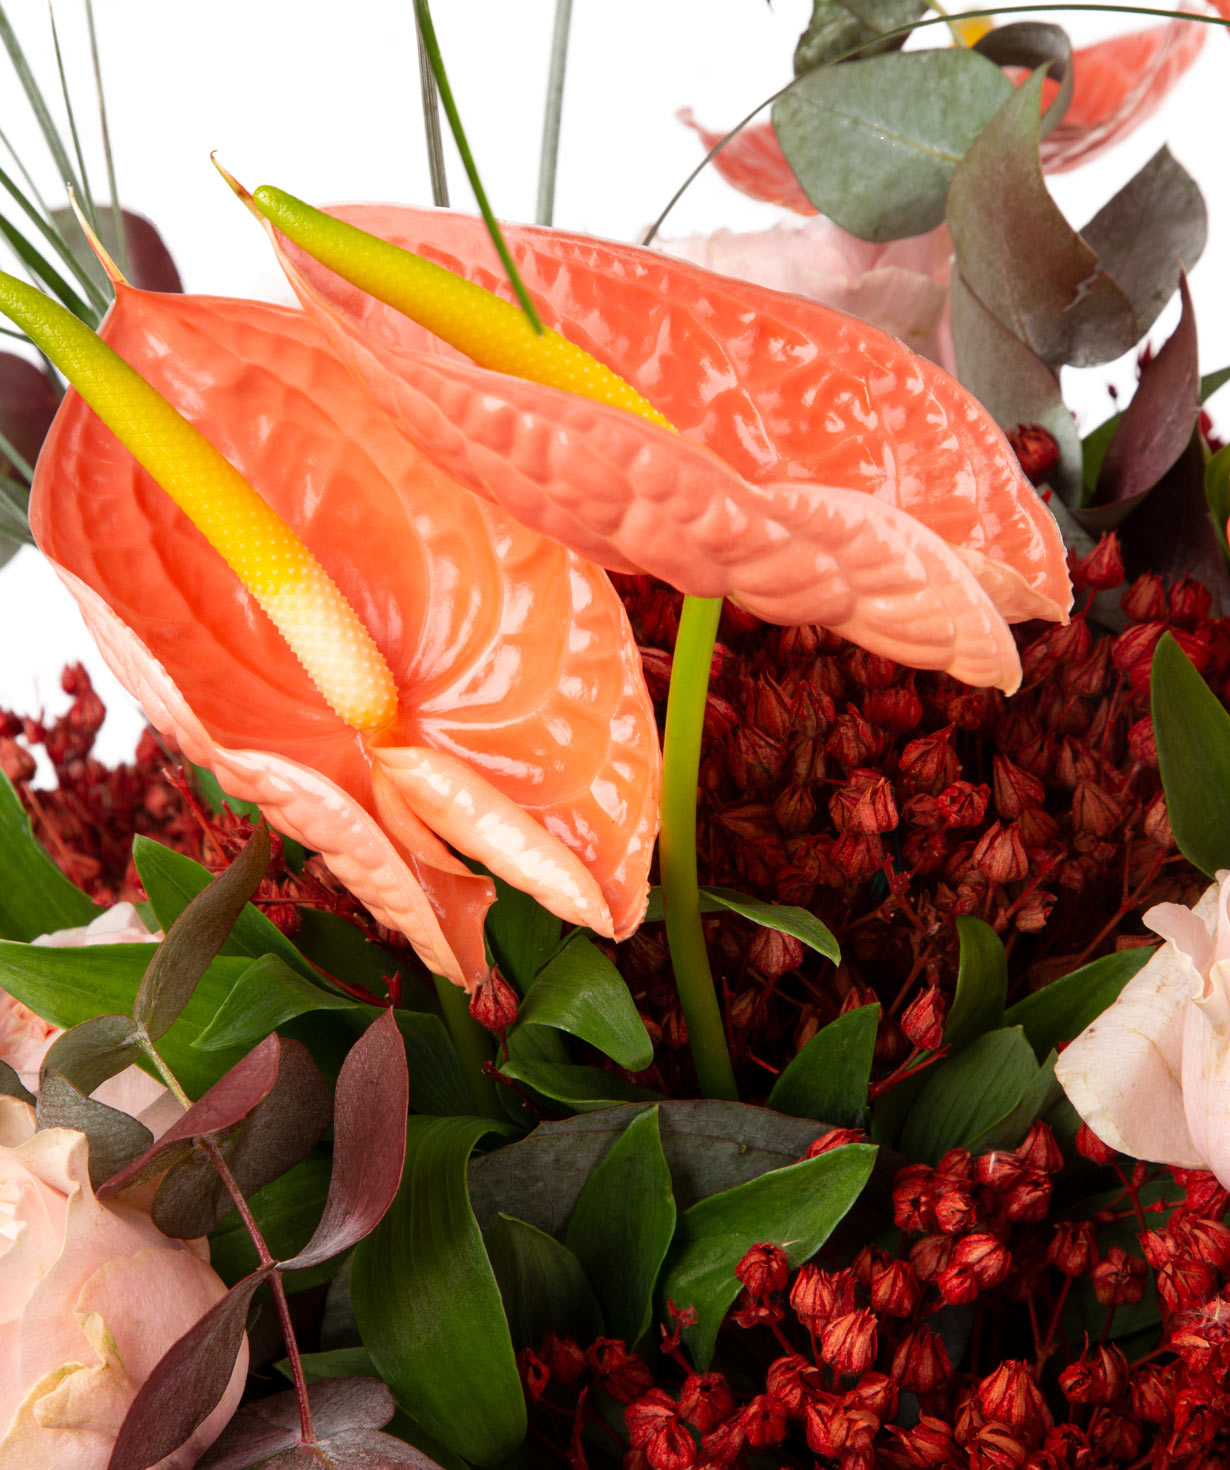 Bouquet  `Polotsk` of roses, anthurium, dried flowers